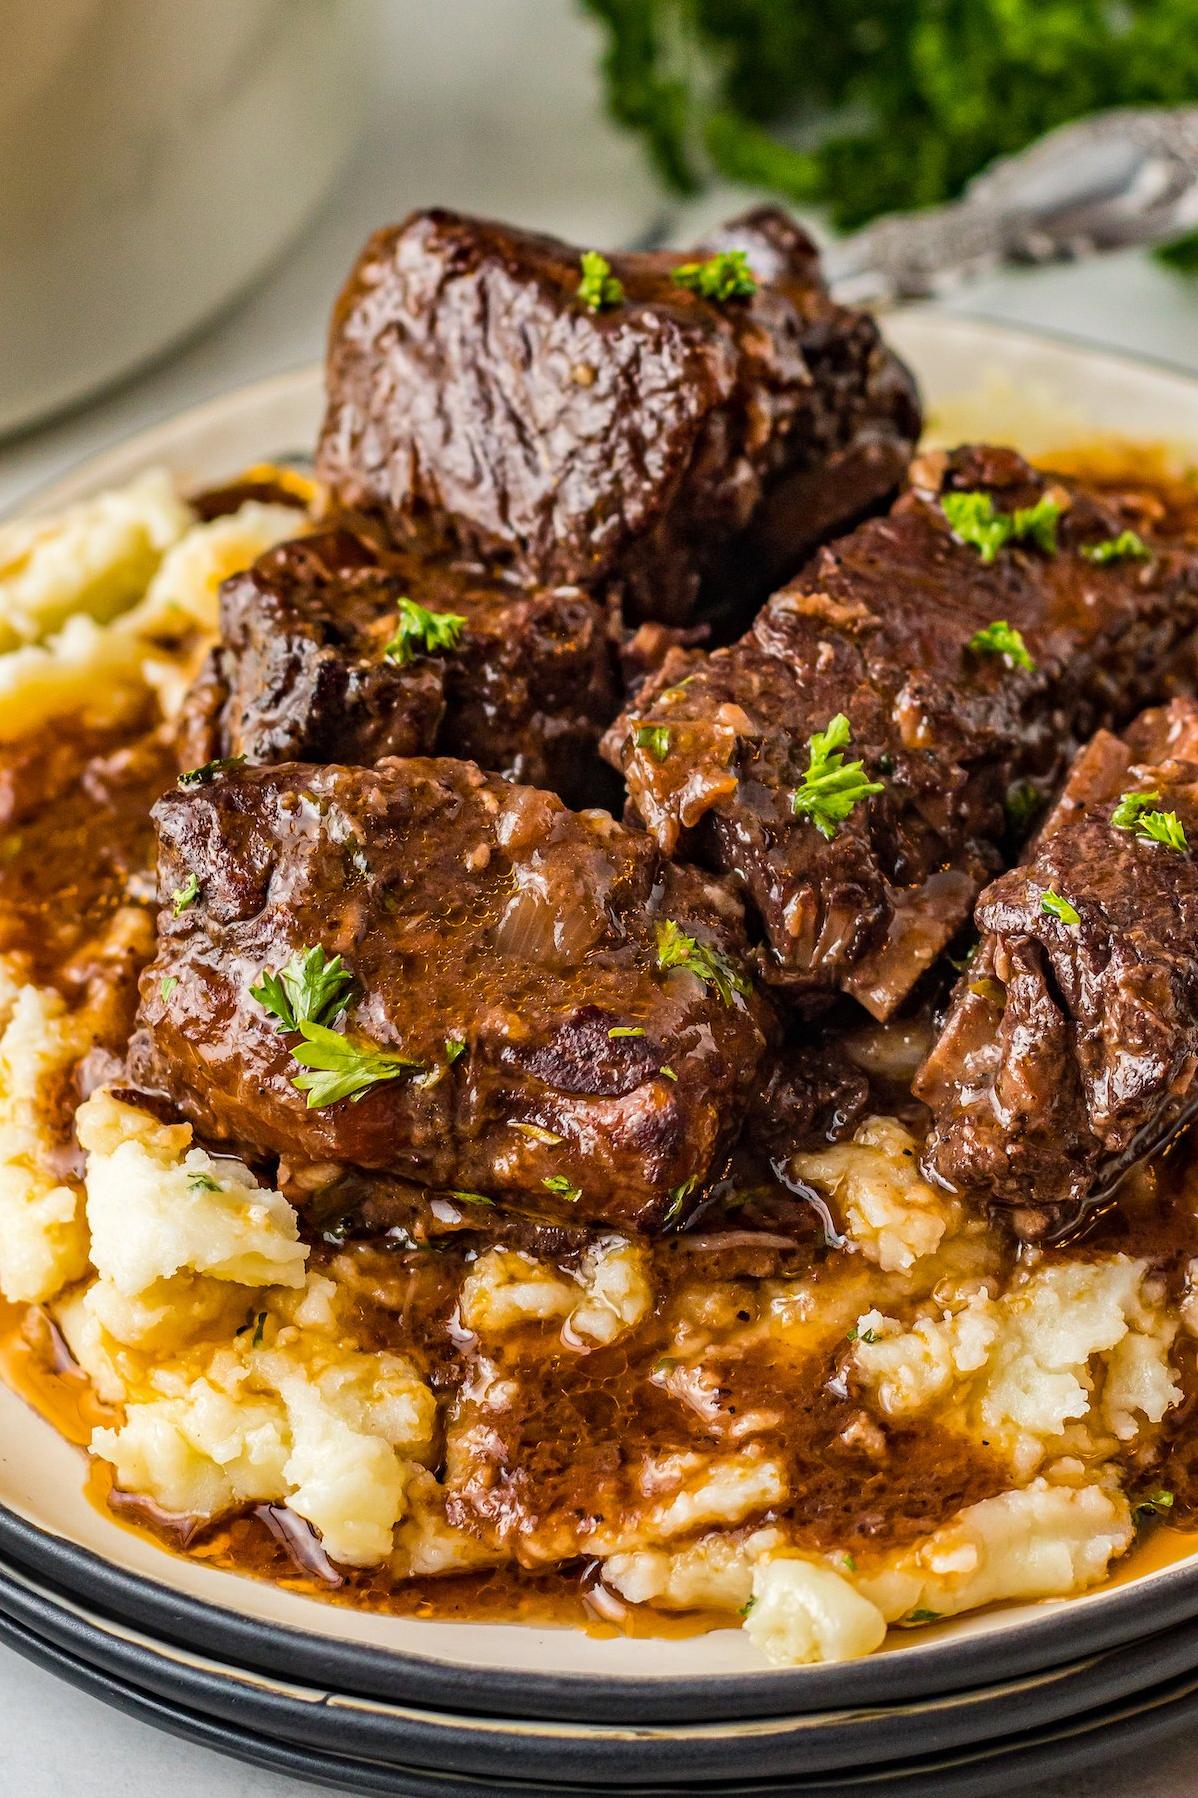  The ultimate soul-warming meal: cabernet-braised beef short ribs